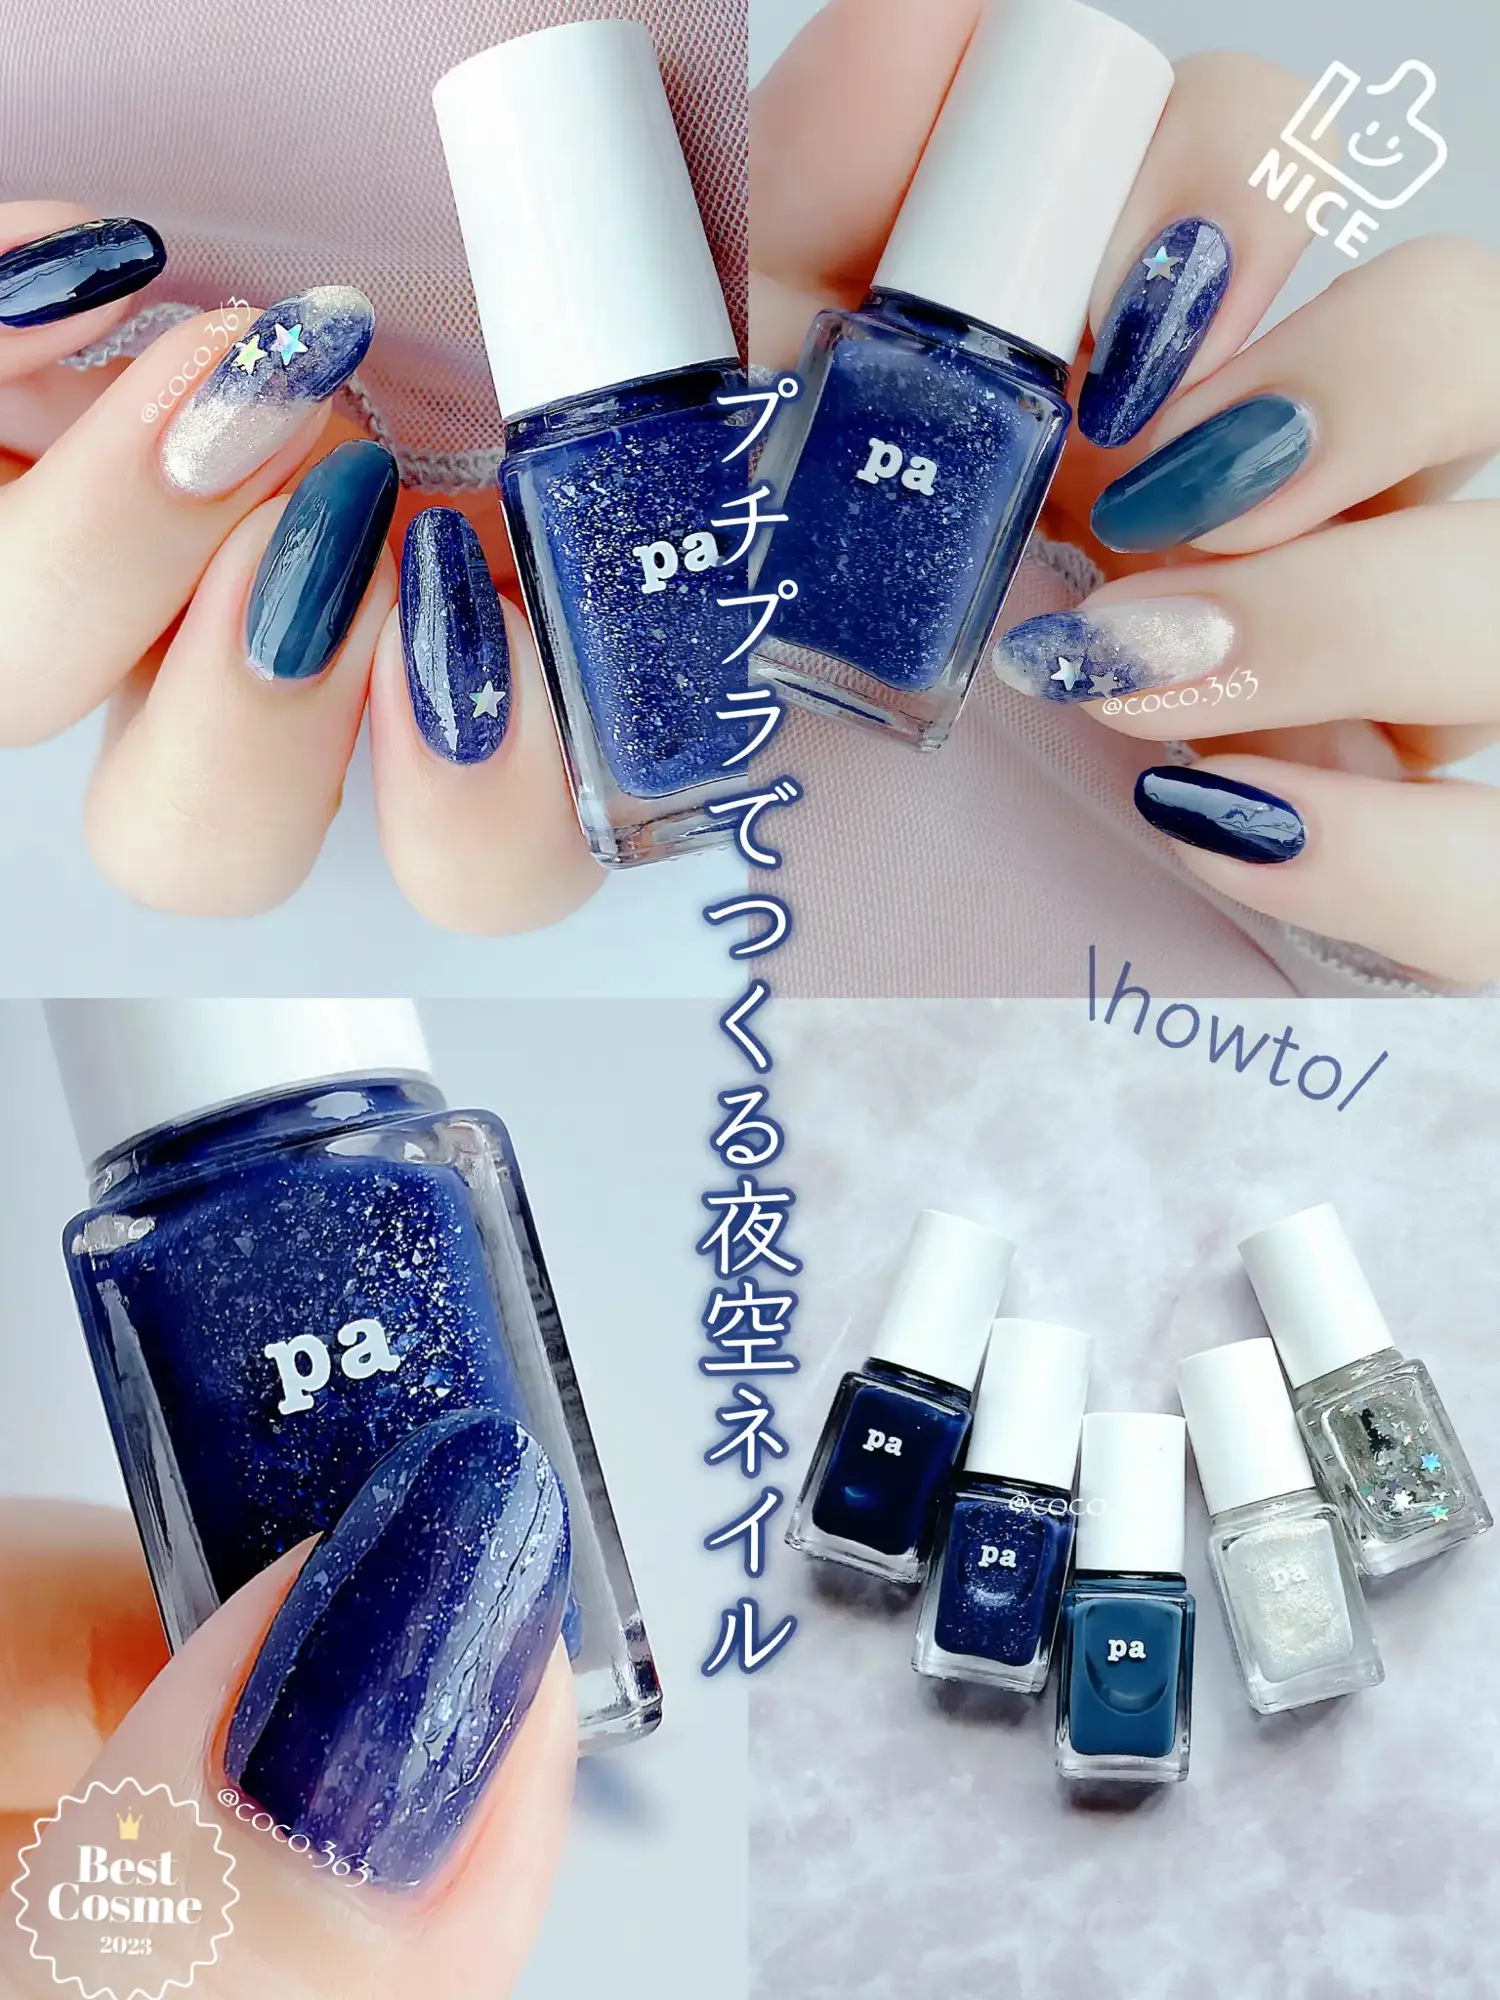 This blue is a night sky nail with a dense sheer blue with glitter